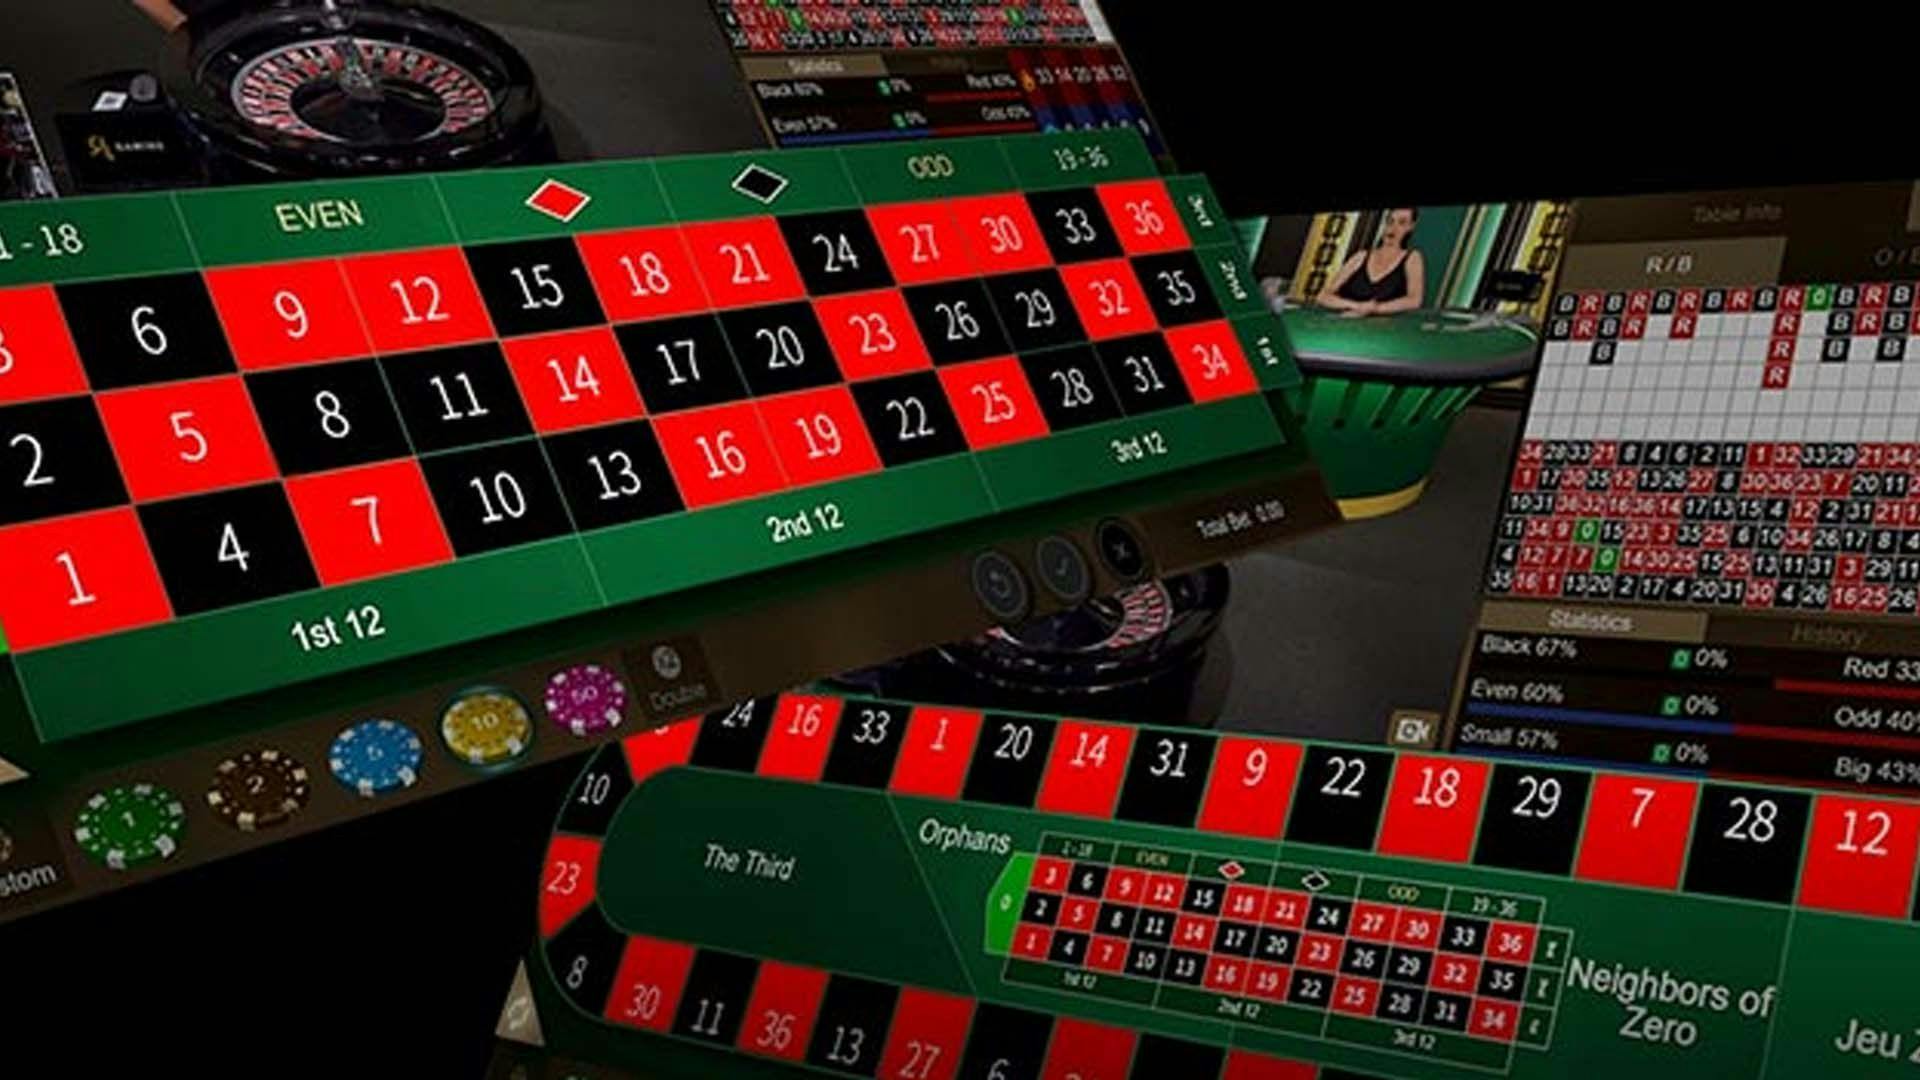 Roulette Live Demo SA Gaming Free Play